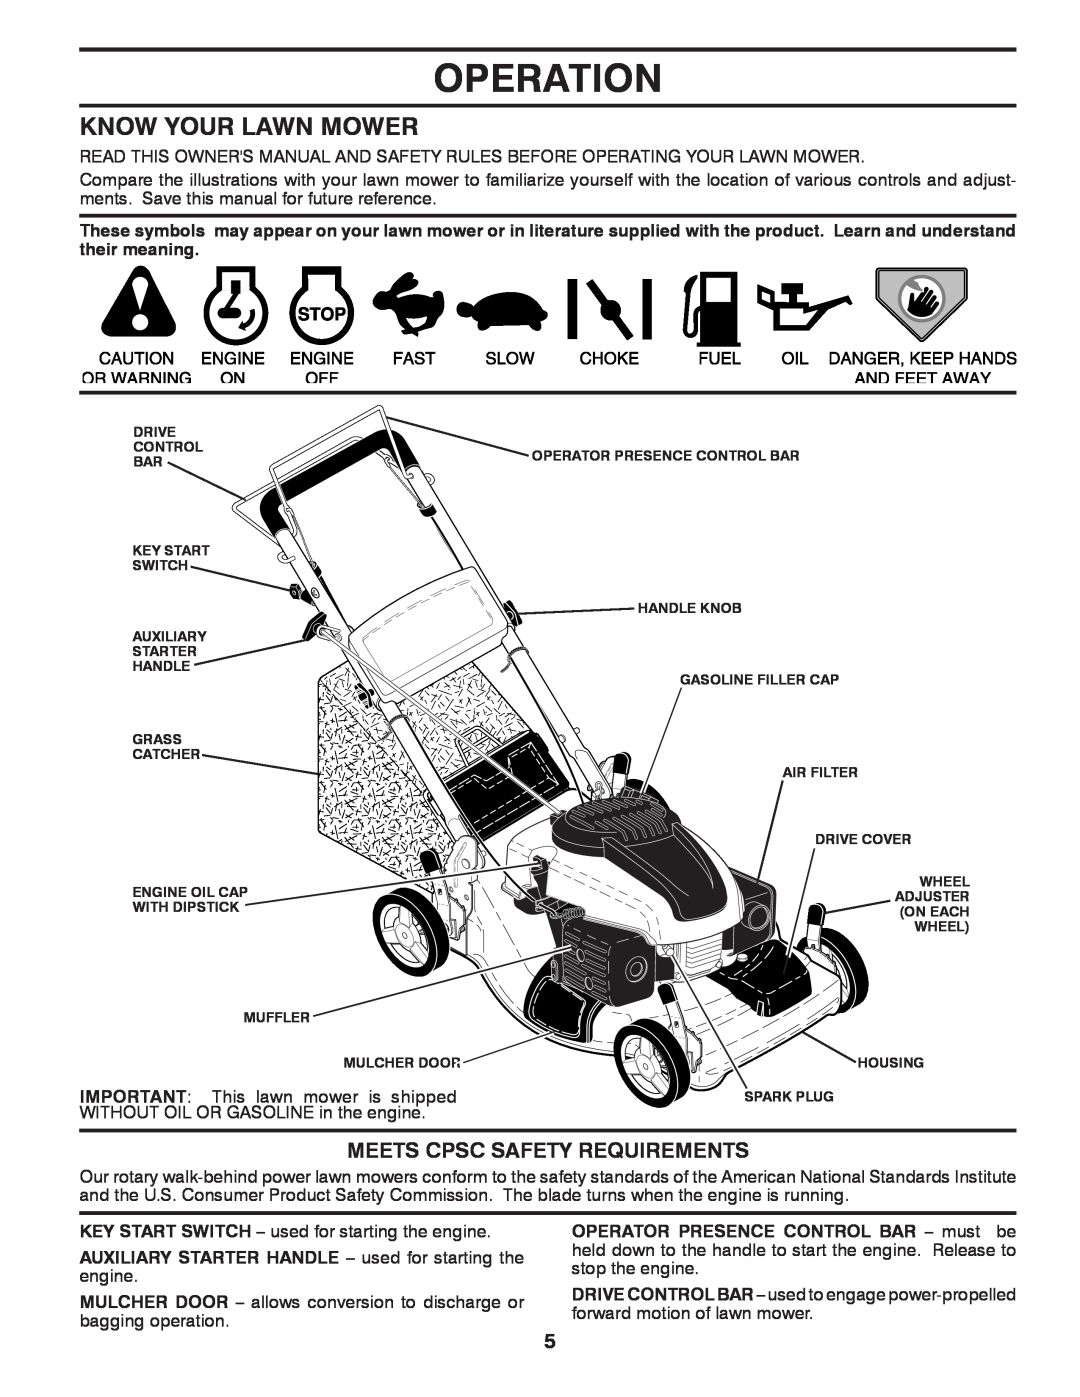 Husqvarna XT722FE owner manual Operation, Know Your Lawn Mower, Meets Cpsc Safety Requirements 